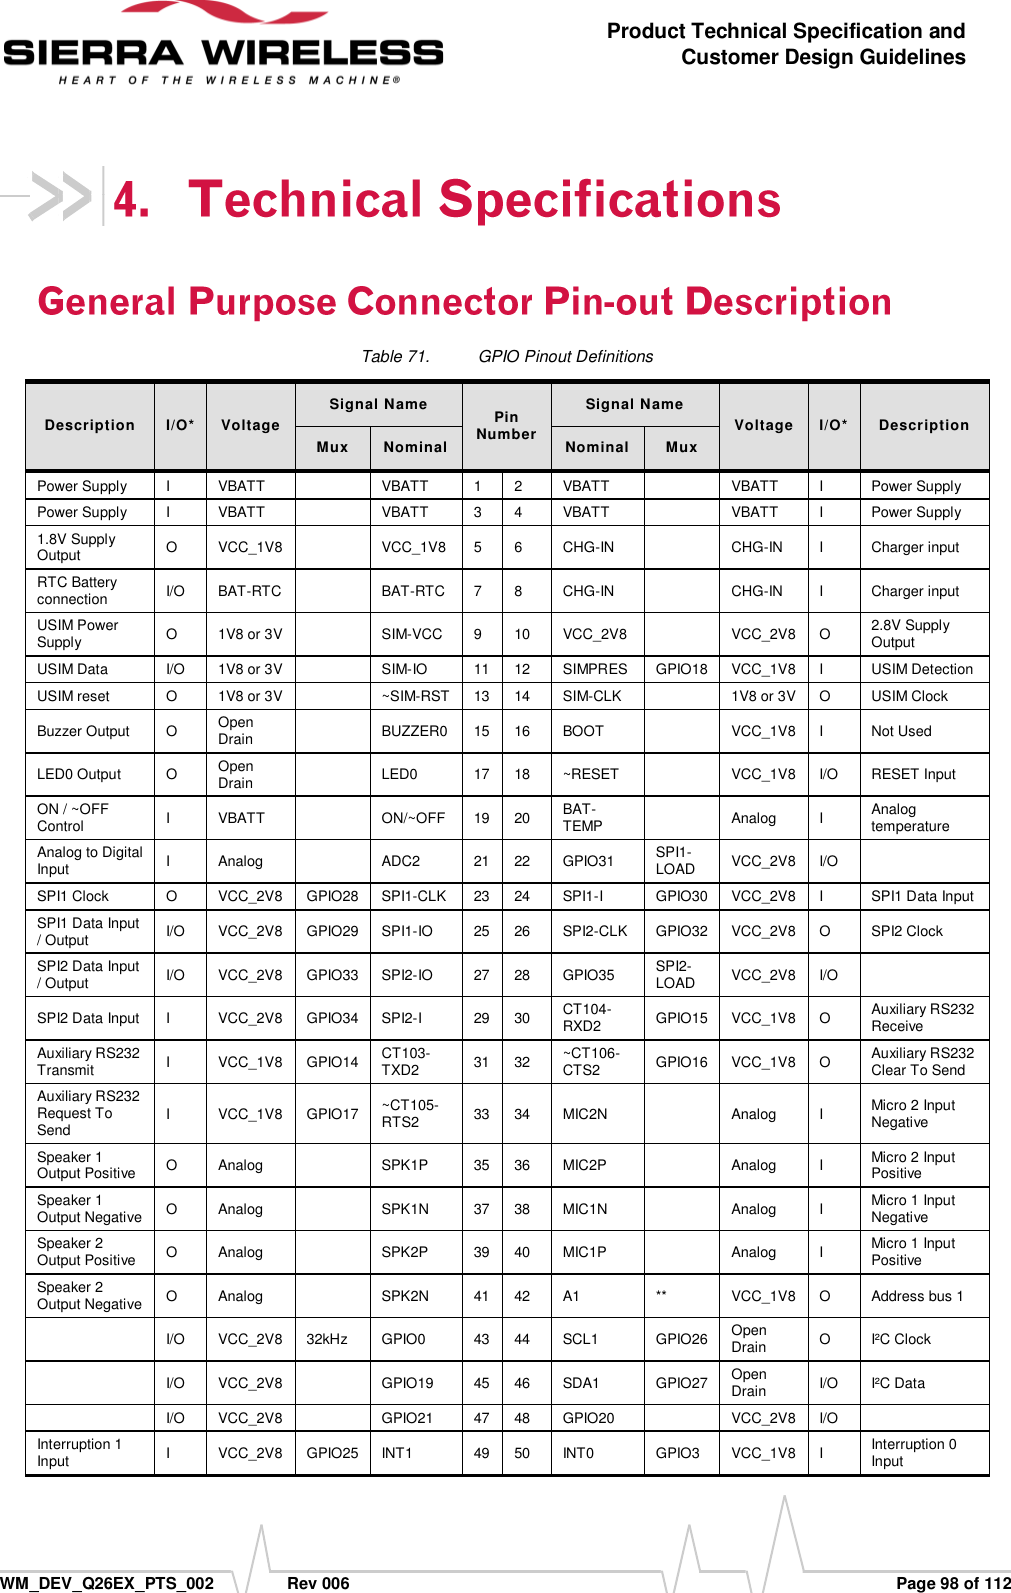      WM_DEV_Q26EX_PTS_002  Rev 006  Page 98 of 112 Product Technical Specification and Customer Design Guidelines  Table 71.  GPIO Pinout Definitions Description I/O* Voltage Signal Name Pin Number Signal Name Voltage I/O* Description Mux Nominal Nominal Mux Power Supply I VBATT  VBATT 1 2 VBATT  VBATT I Power Supply Power Supply I VBATT  VBATT 3 4 VBATT  VBATT I Power Supply 1.8V Supply Output O VCC_1V8  VCC_1V8 5 6 CHG-IN  CHG-IN I Charger input RTC Battery connection I/O BAT-RTC  BAT-RTC 7 8 CHG-IN  CHG-IN I Charger input USIM Power Supply O 1V8 or 3V  SIM-VCC 9 10 VCC_2V8  VCC_2V8 O 2.8V Supply Output USIM Data I/O 1V8 or 3V  SIM-IO 11 12 SIMPRES GPIO18 VCC_1V8 I USIM Detection USIM reset  O 1V8 or 3V  ~SIM-RST 13 14 SIM-CLK  1V8 or 3V O USIM Clock Buzzer Output O Open Drain  BUZZER0 15 16 BOOT  VCC_1V8 I Not Used LED0 Output O Open Drain  LED0 17 18 ~RESET  VCC_1V8 I/O RESET Input ON / ~OFF Control I VBATT  ON/~OFF 19 20 BAT-TEMP  Analog I Analog temperature  Analog to Digital Input I Analog  ADC2 21 22 GPIO31 SPI1- LOAD VCC_2V8 I/O  SPI1 Clock O VCC_2V8 GPIO28 SPI1-CLK 23 24 SPI1-I GPIO30 VCC_2V8 I SPI1 Data Input SPI1 Data Input / Output I/O VCC_2V8 GPIO29 SPI1-IO 25 26 SPI2-CLK GPIO32 VCC_2V8 O SPI2 Clock  SPI2 Data Input / Output I/O VCC_2V8 GPIO33 SPI2-IO 27 28 GPIO35 SPI2- LOAD VCC_2V8 I/O  SPI2 Data Input I VCC_2V8 GPIO34 SPI2-I 29 30 CT104-RXD2 GPIO15 VCC_1V8 O Auxiliary RS232 Receive Auxiliary RS232 Transmit I VCC_1V8 GPIO14 CT103-TXD2 31 32 ~CT106-CTS2 GPIO16 VCC_1V8 O Auxiliary RS232 Clear To Send Auxiliary RS232 Request To Send I VCC_1V8 GPIO17 ~CT105-RTS2 33 34 MIC2N  Analog I Micro 2 Input Negative Speaker 1 Output Positive O Analog  SPK1P 35 36 MIC2P  Analog I Micro 2 Input Positive Speaker 1 Output Negative O Analog  SPK1N 37 38 MIC1N  Analog I Micro 1 Input Negative Speaker 2 Output Positive O Analog  SPK2P 39 40 MIC1P  Analog I Micro 1 Input Positive Speaker 2 Output Negative O Analog  SPK2N 41 42 A1 ** VCC_1V8 O Address bus 1  I/O VCC_2V8 32kHz GPIO0 43 44 SCL1 GPIO26 Open Drain O I²C Clock  I/O VCC_2V8  GPIO19 45 46 SDA1 GPIO27 Open Drain I/O I²C Data  I/O VCC_2V8  GPIO21 47 48 GPIO20  VCC_2V8 I/O  Interruption 1 Input I VCC_2V8 GPIO25 INT1 49 50 INT0 GPIO3 VCC_1V8 I Interruption 0 Input 